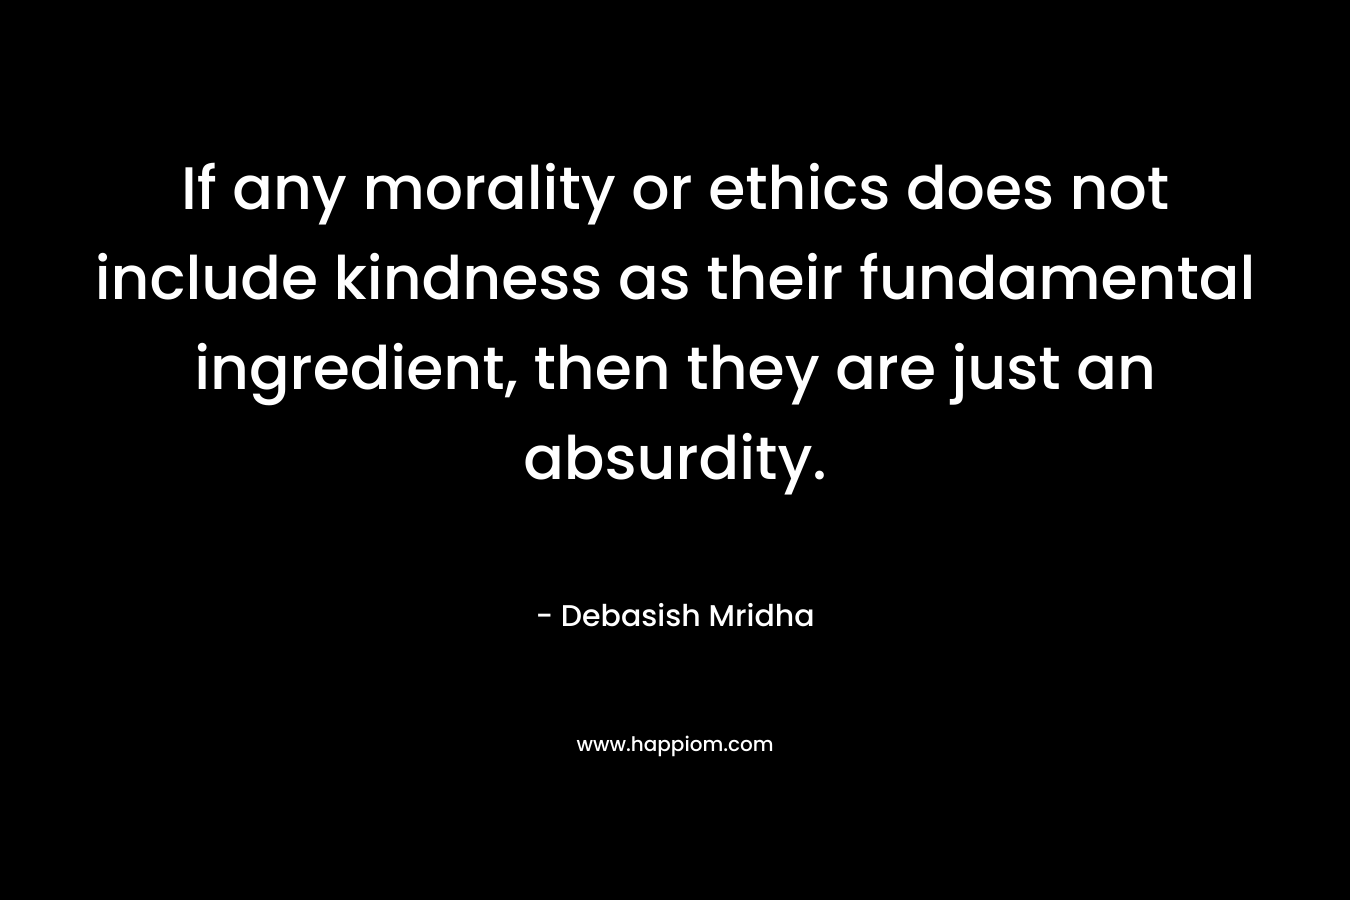 If any morality or ethics does not include kindness as their fundamental ingredient, then they are just an absurdity. – Debasish Mridha